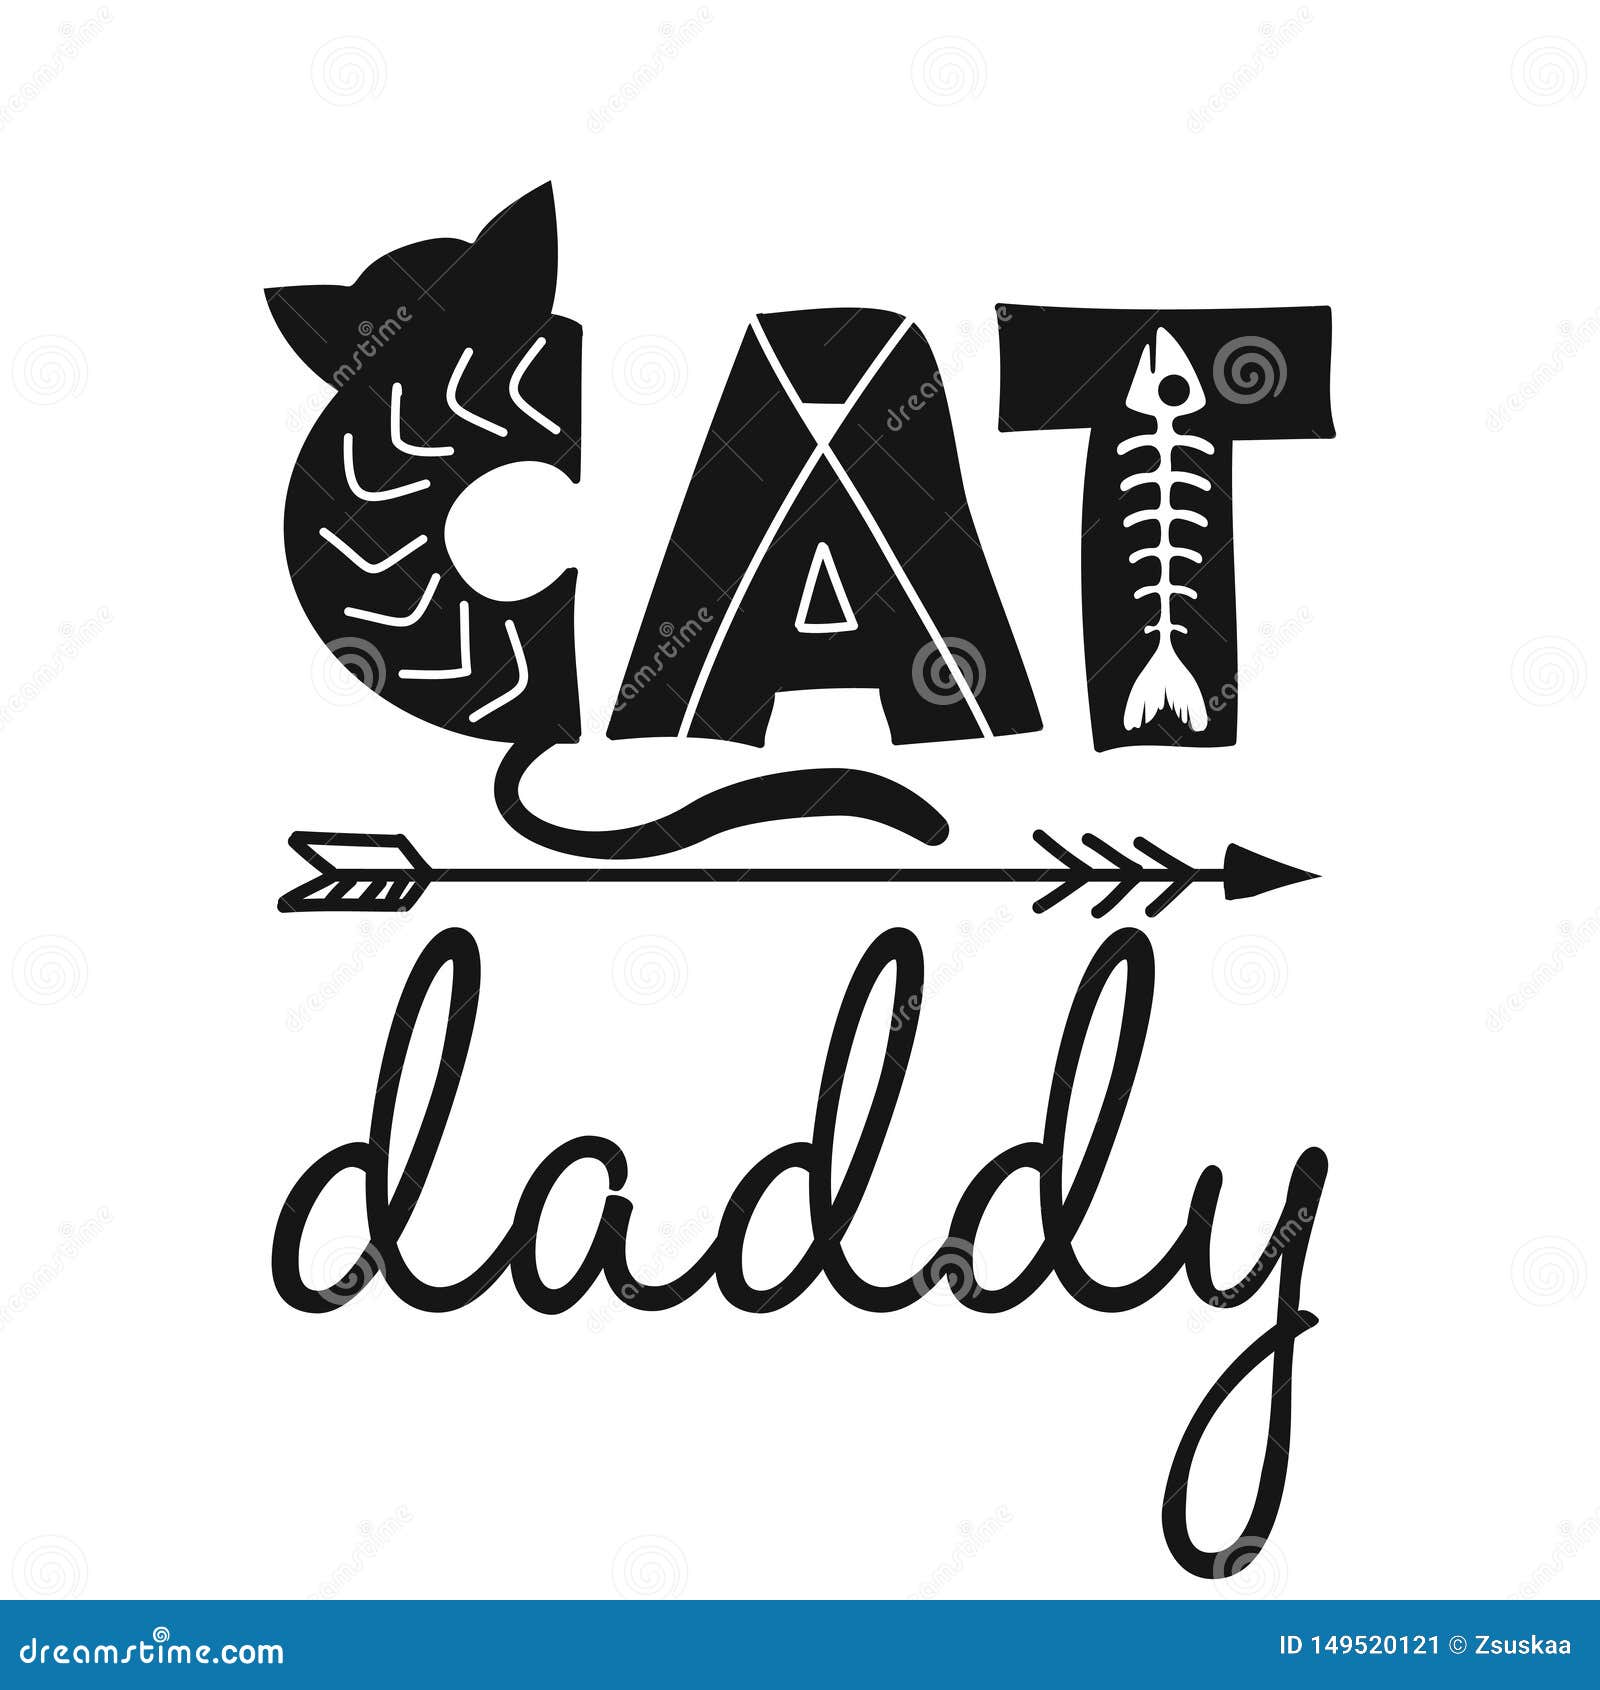 Download Cat Daddy - Funny Quote Design. Stock Vector - Illustration of illustration, handwritten: 149520121